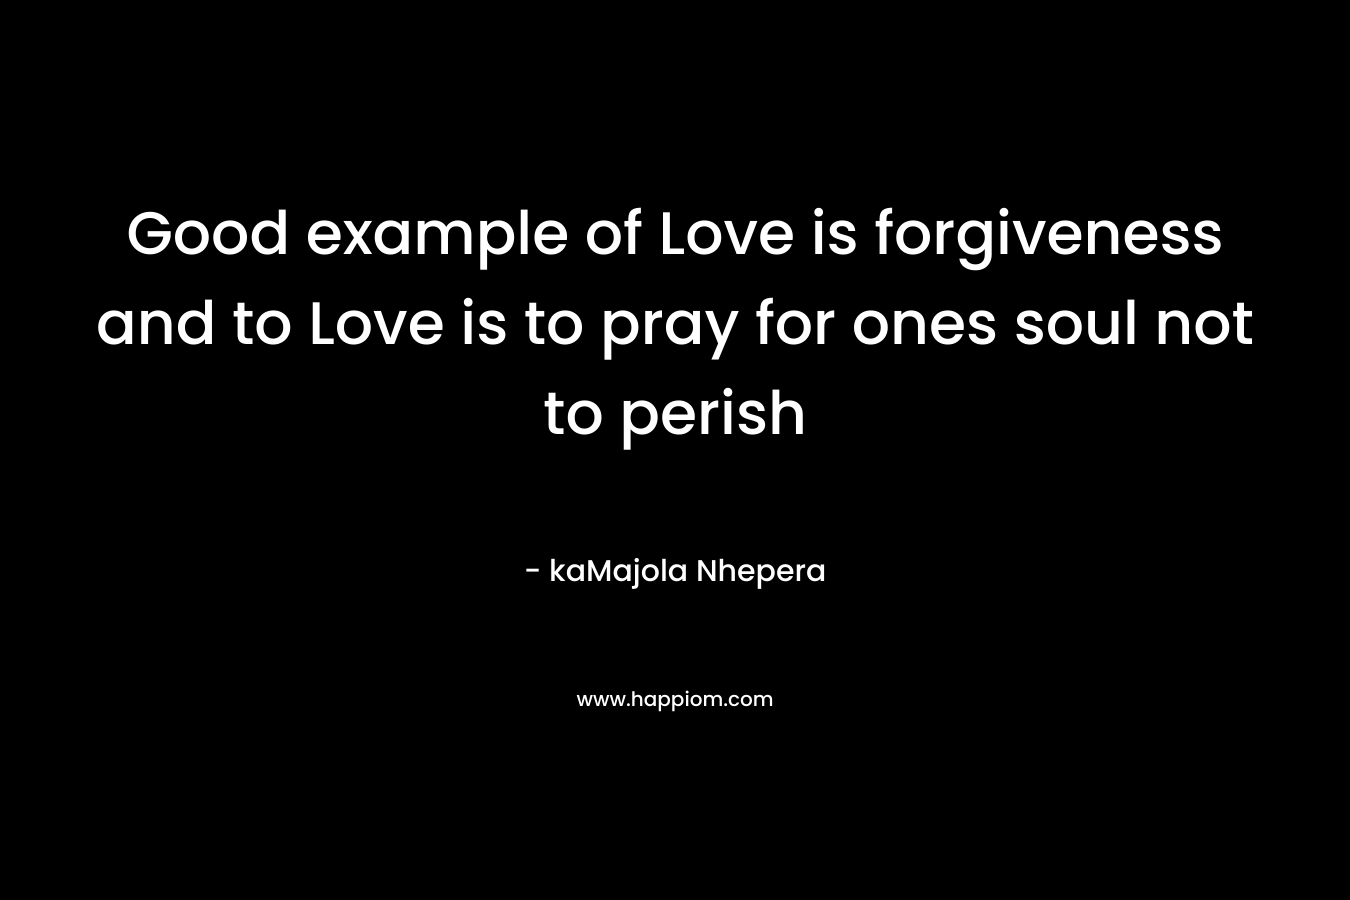 Good example of Love is forgiveness and to Love is to pray for ones soul not to perish